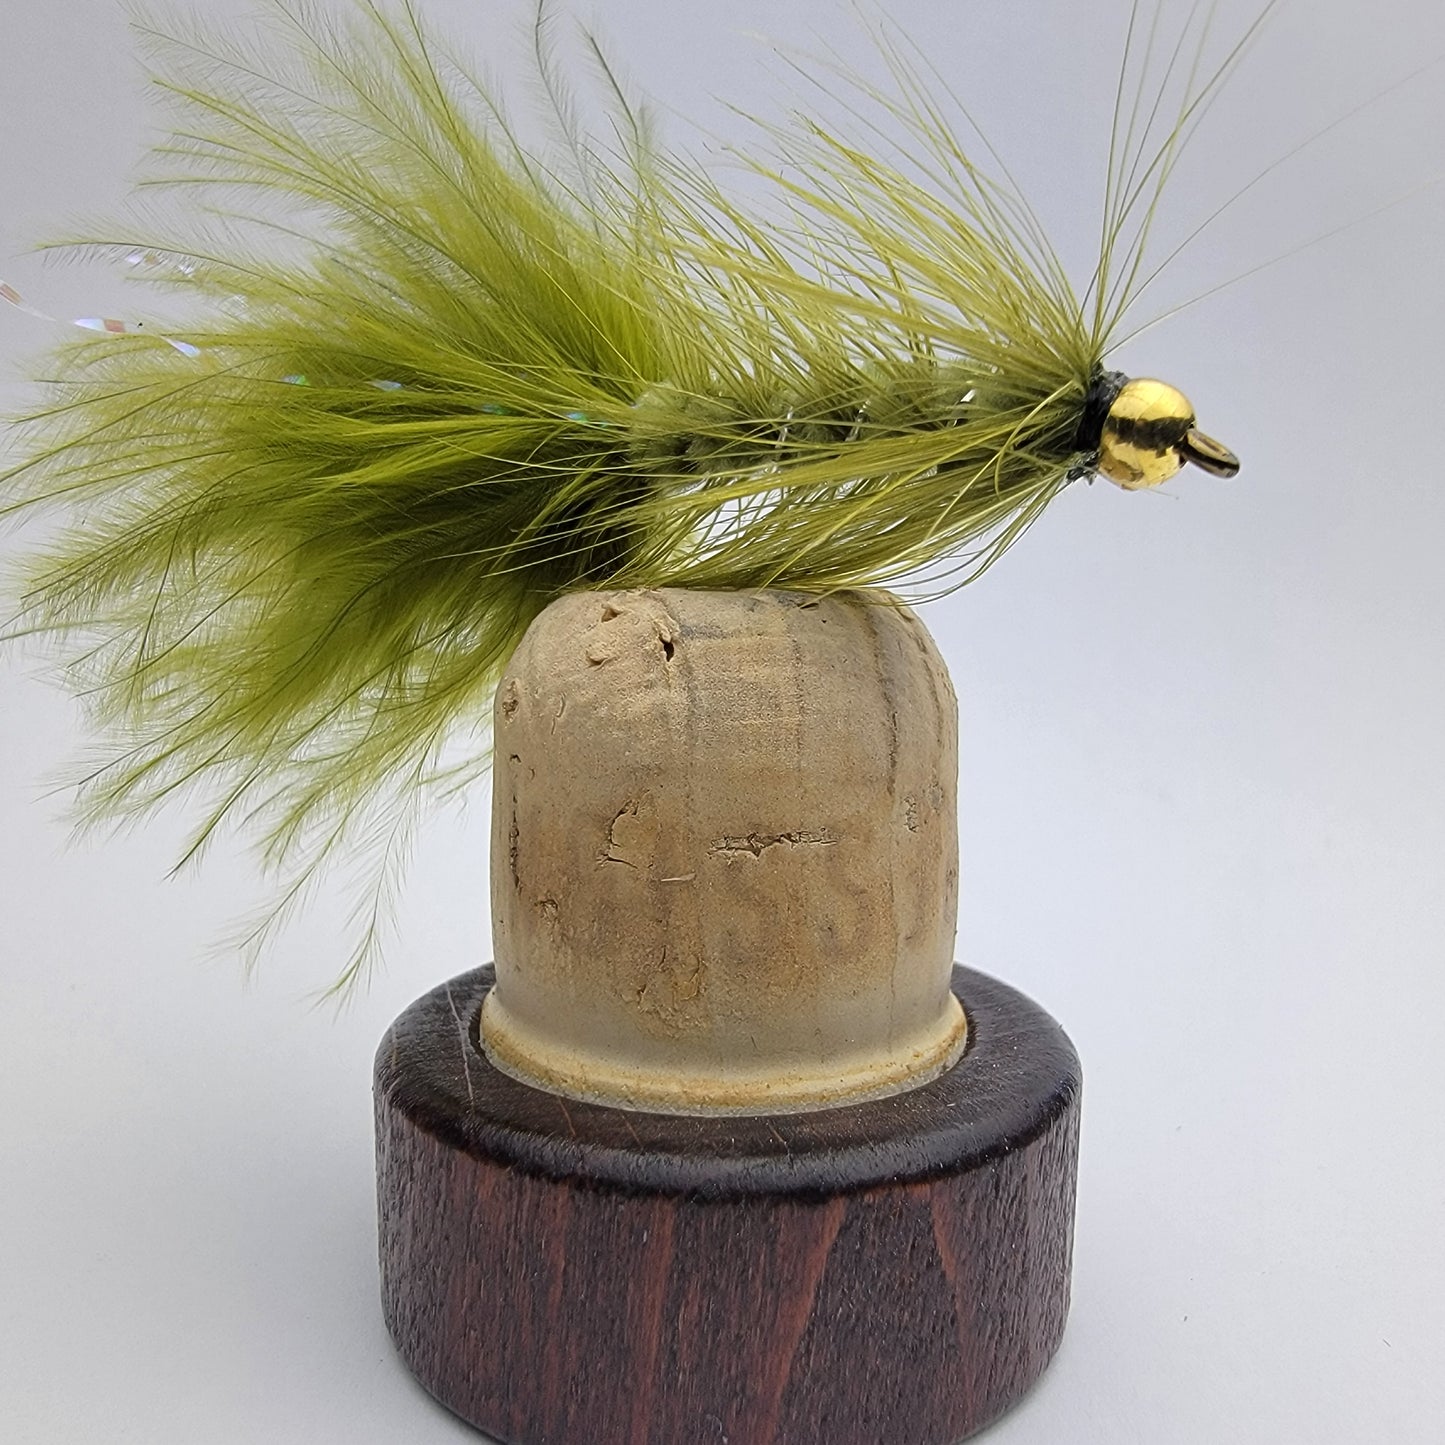 South Platte River Match the Hatch Fly Box | Small Batch Fly Fishing Flies